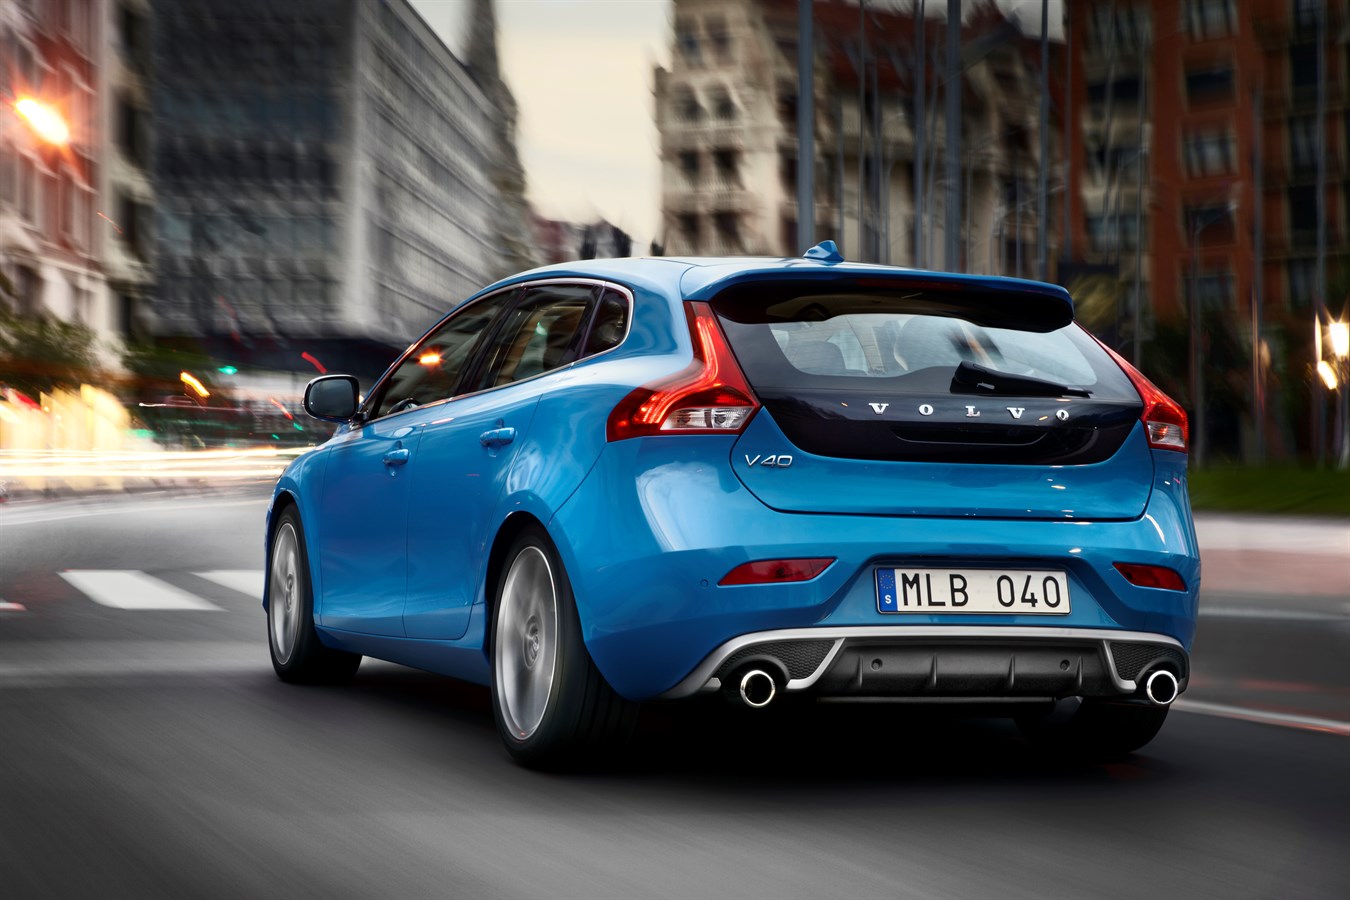 low emission D2 automatic petrol join the all-new Volvo V40 range - Volvo Car Media Newsroom